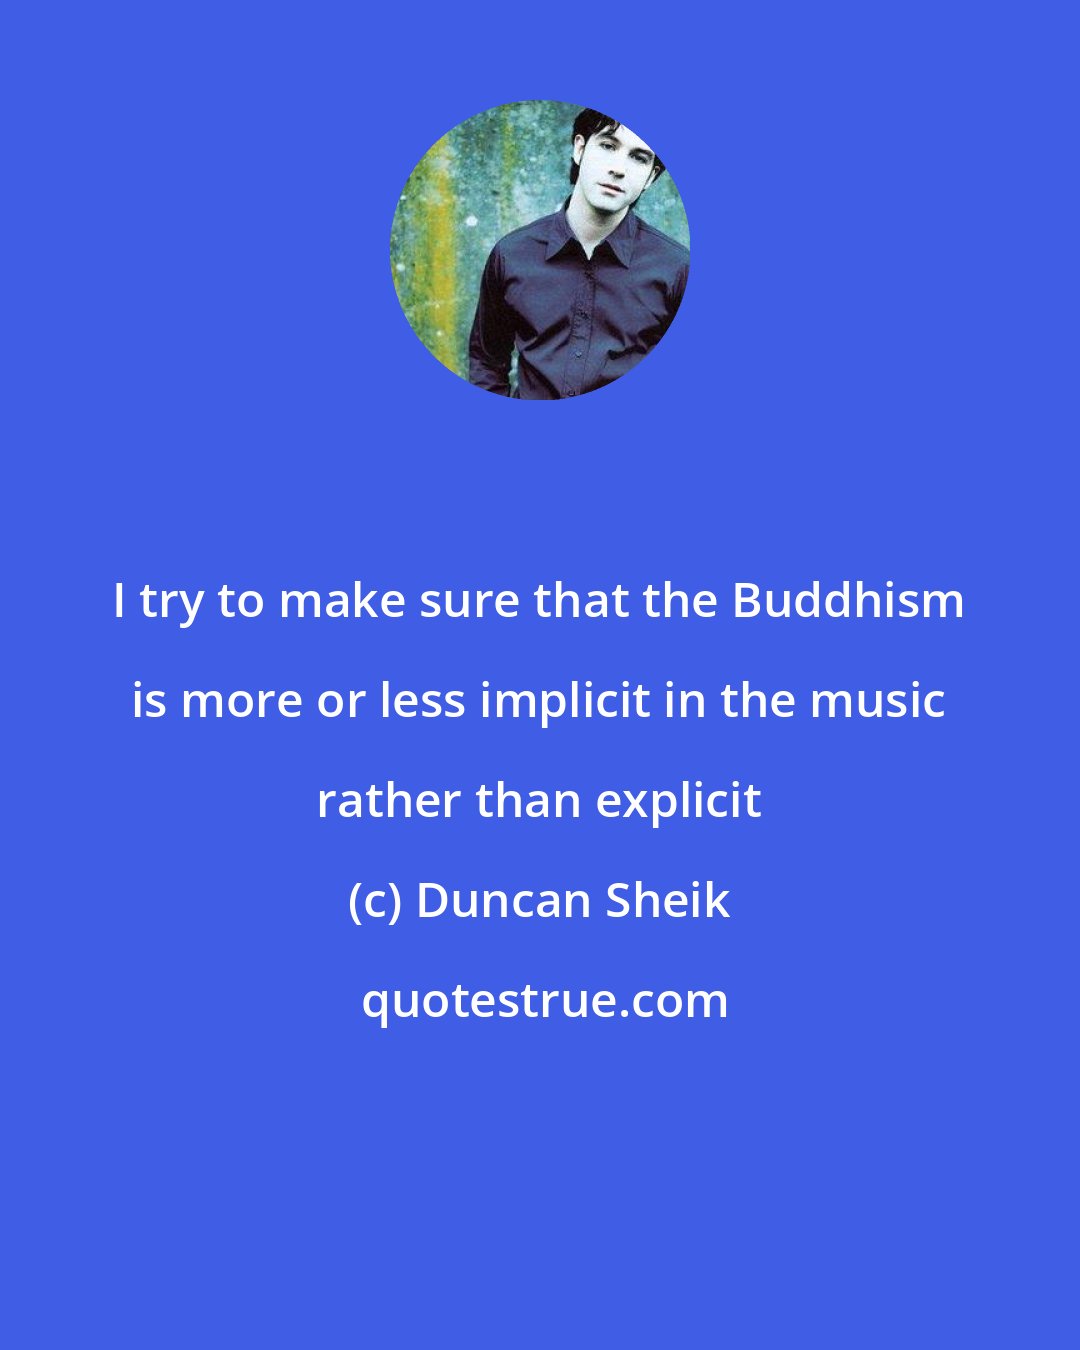 Duncan Sheik: I try to make sure that the Buddhism is more or less implicit in the music rather than explicit